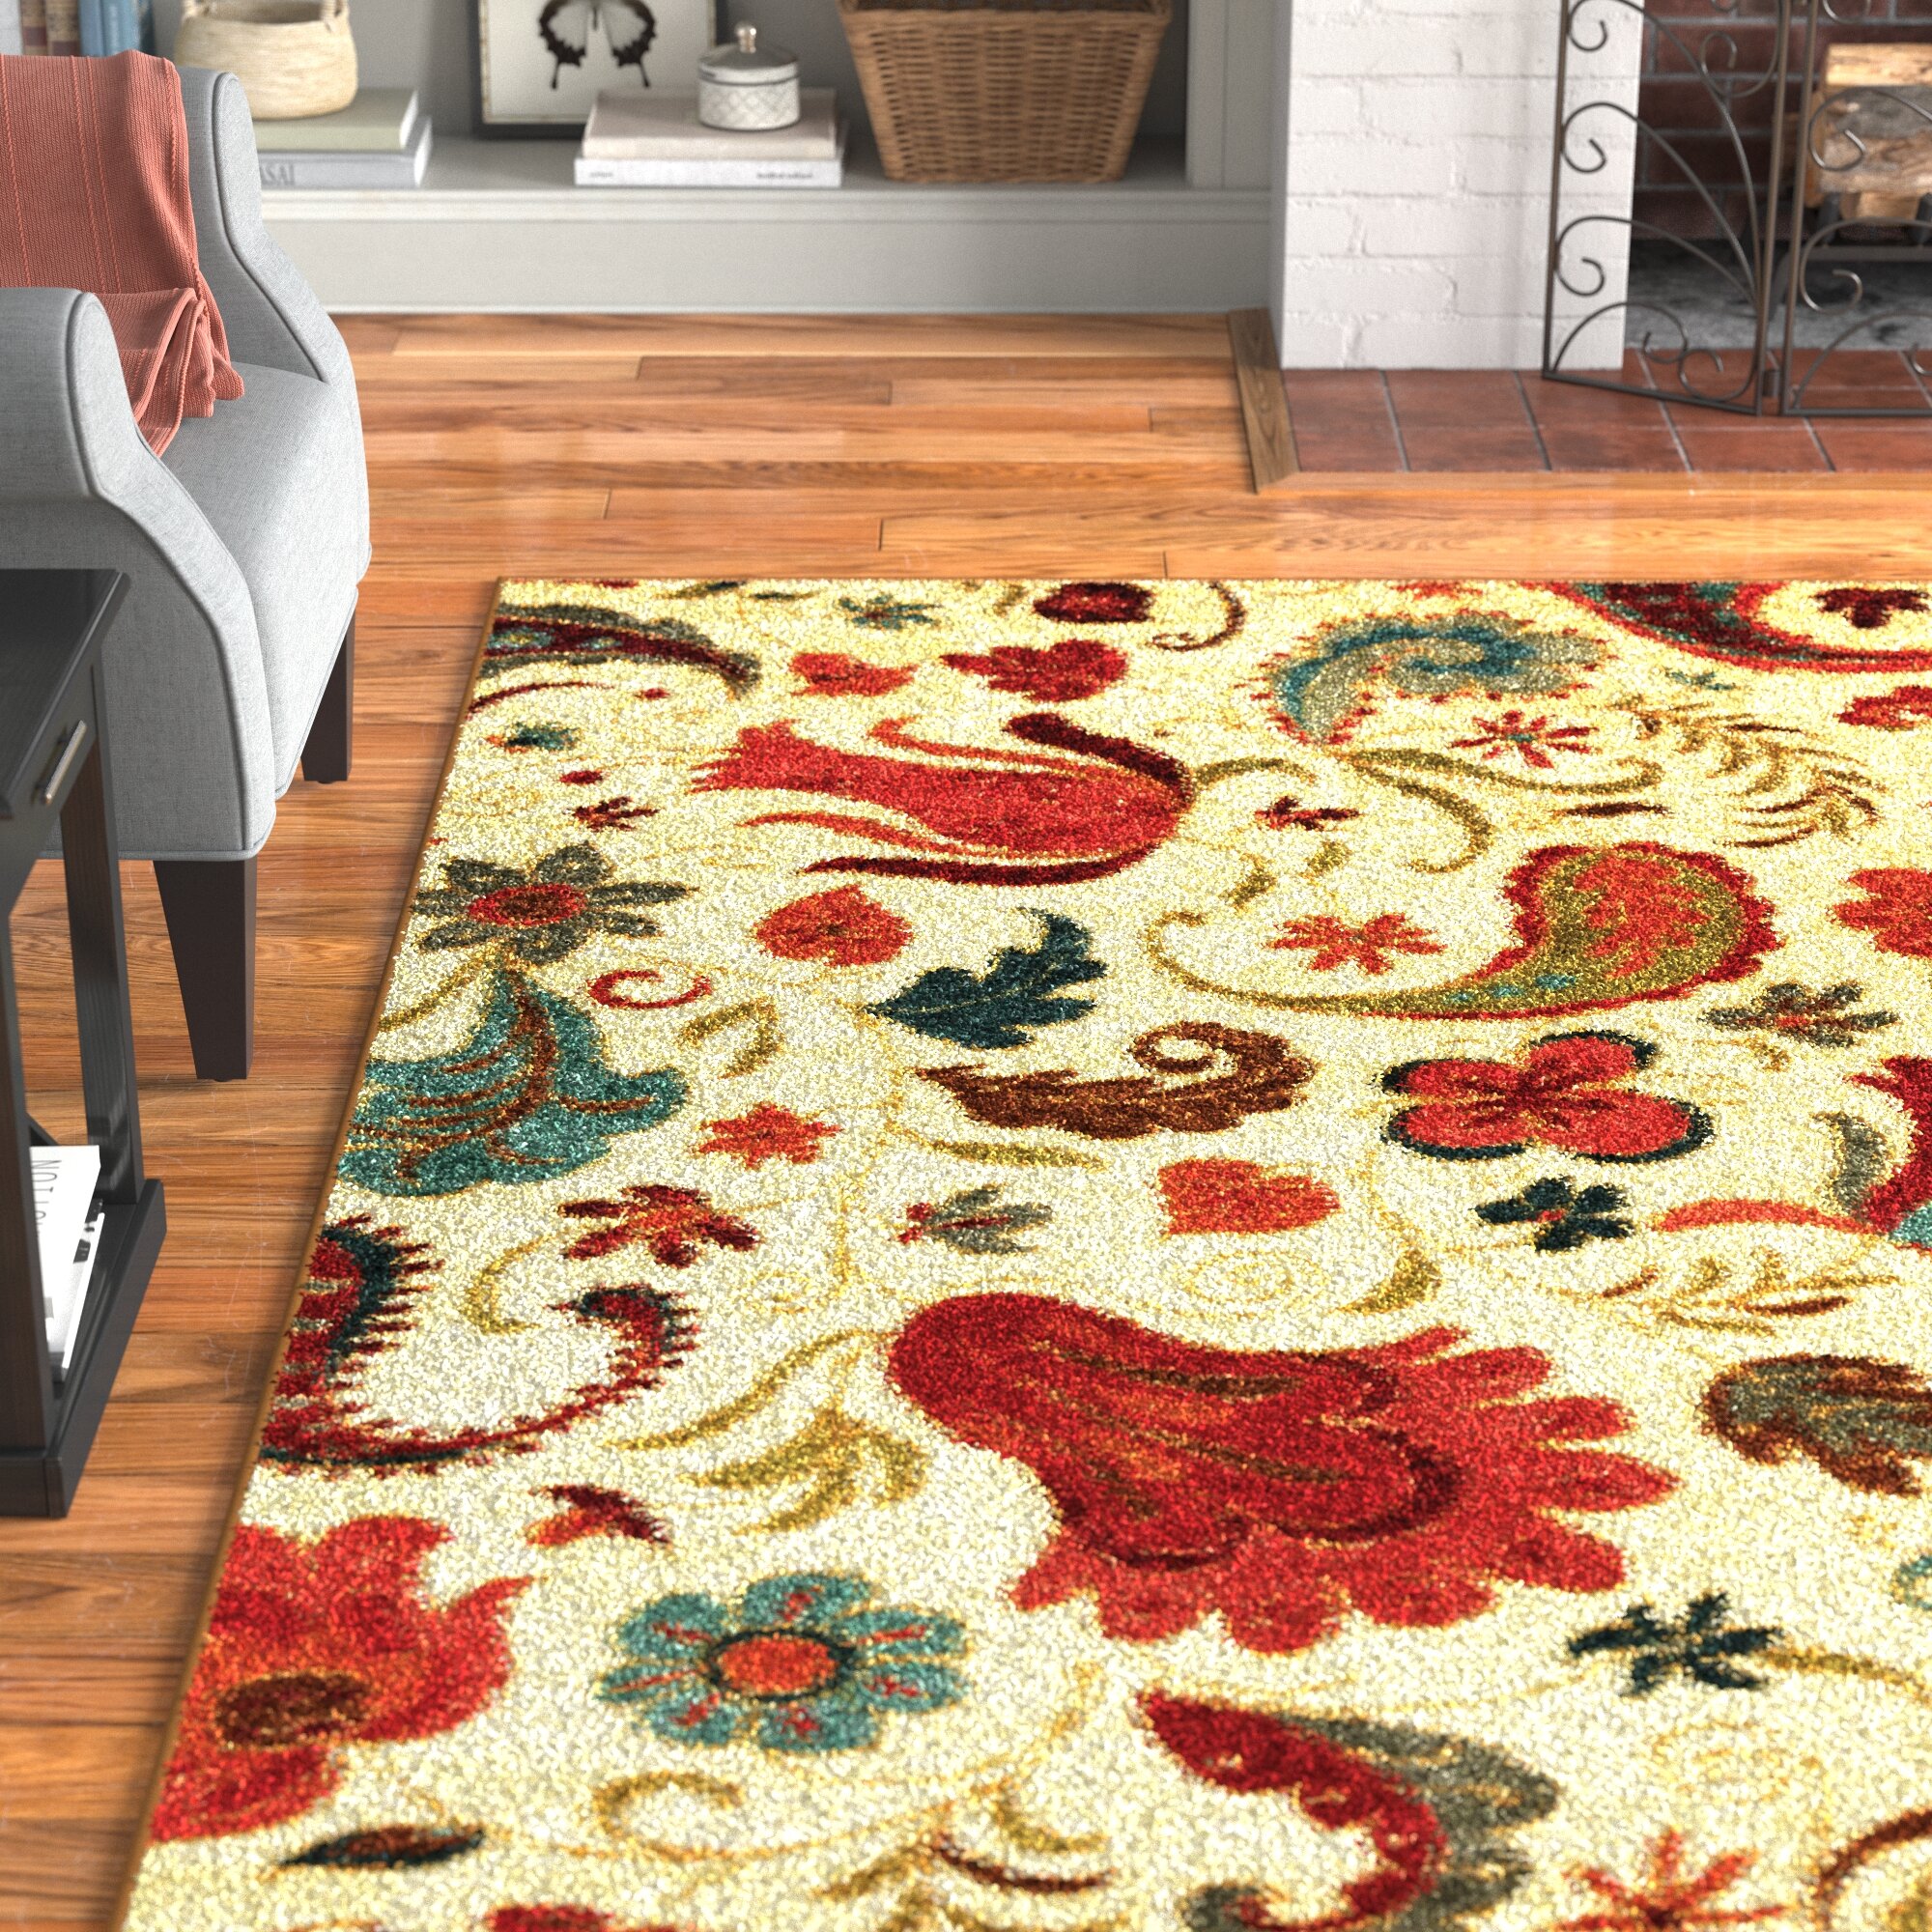 Art of Knot Big Pine Area Rug Neutral 7'6 x 10'9